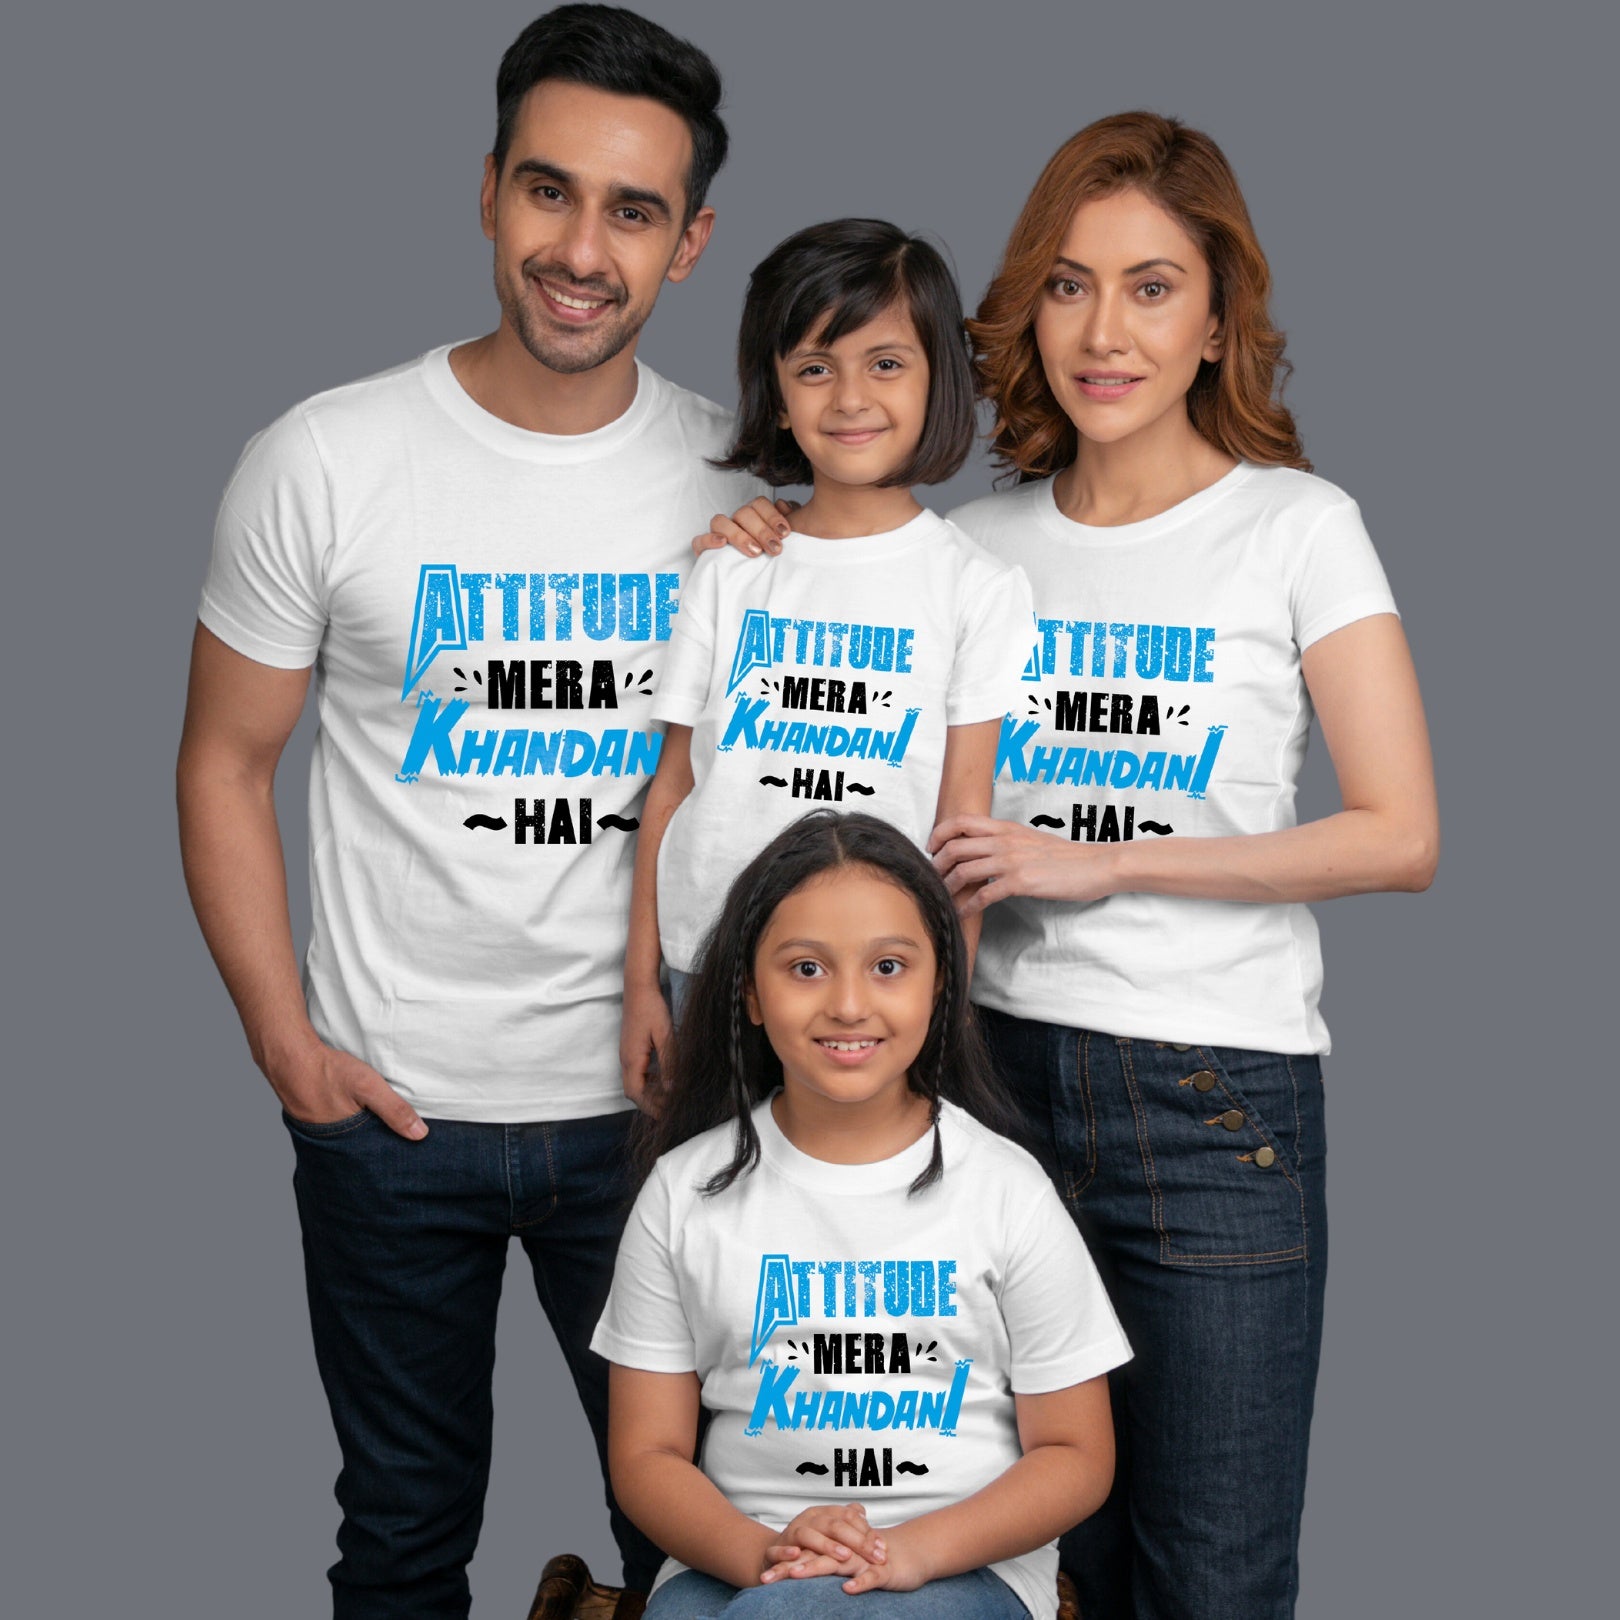 Family t shirts set of 4 Mom Dad Two Daughters in White Colour - Attitude Mera Khandani Hain Variant